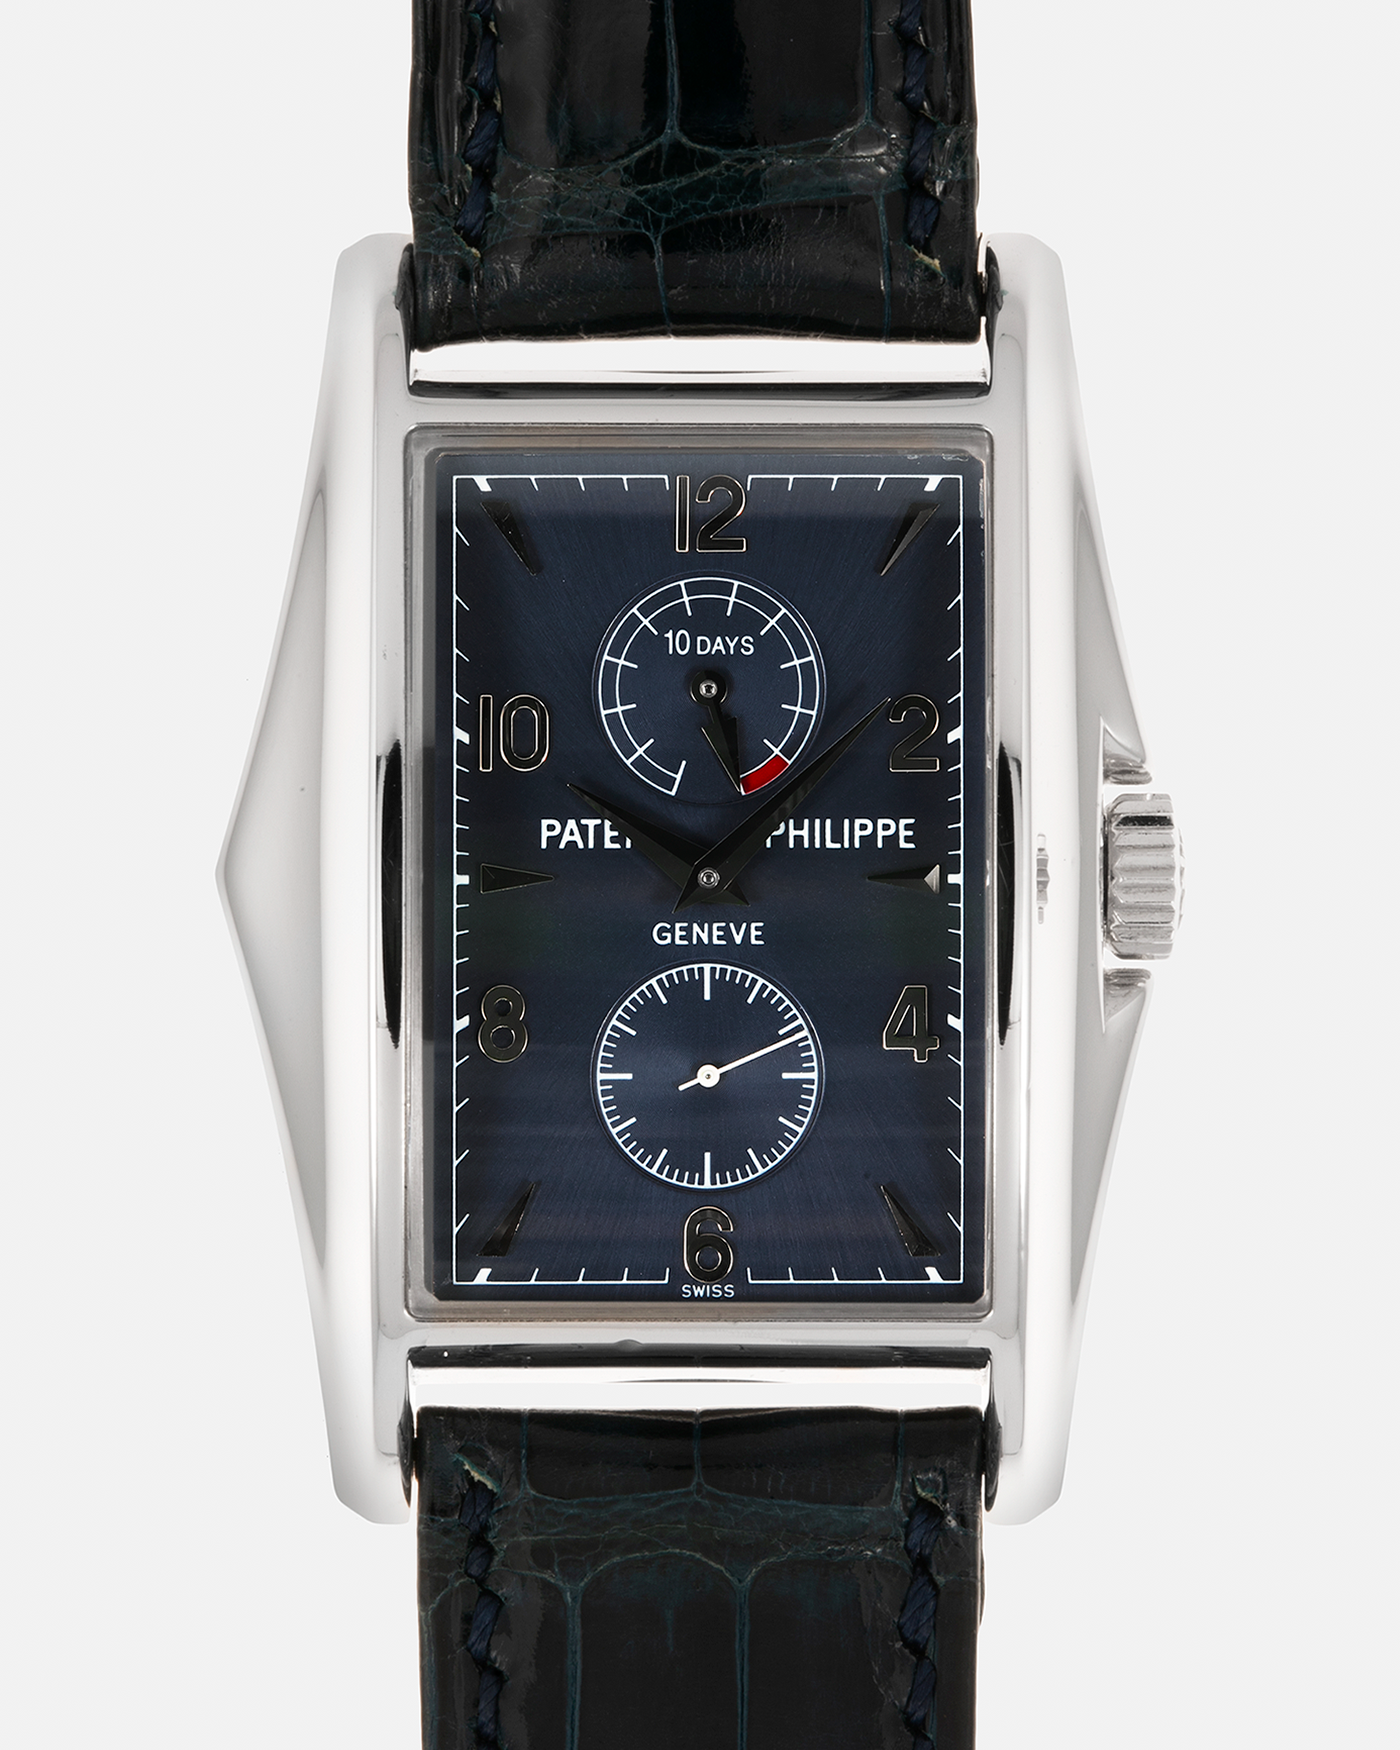 Brand: Patek Philippe Year: 2000 Model: Gondolo 10 Days, Limited Edition of 450 pieces in 18-carat White Gold Case / Blue Dial Reference Number: 5100G-001 Material: 18-carat White Gold  Movement: Patek Philippe Cal. 28-20/200 PS IRM, Manual-Winding Case Dimensions: 46mm x 34mm Lug Width: 20mm Strap: Patek Philippe Blue Alligator Strap with Signed 18-carat White Gold Tang Buckle